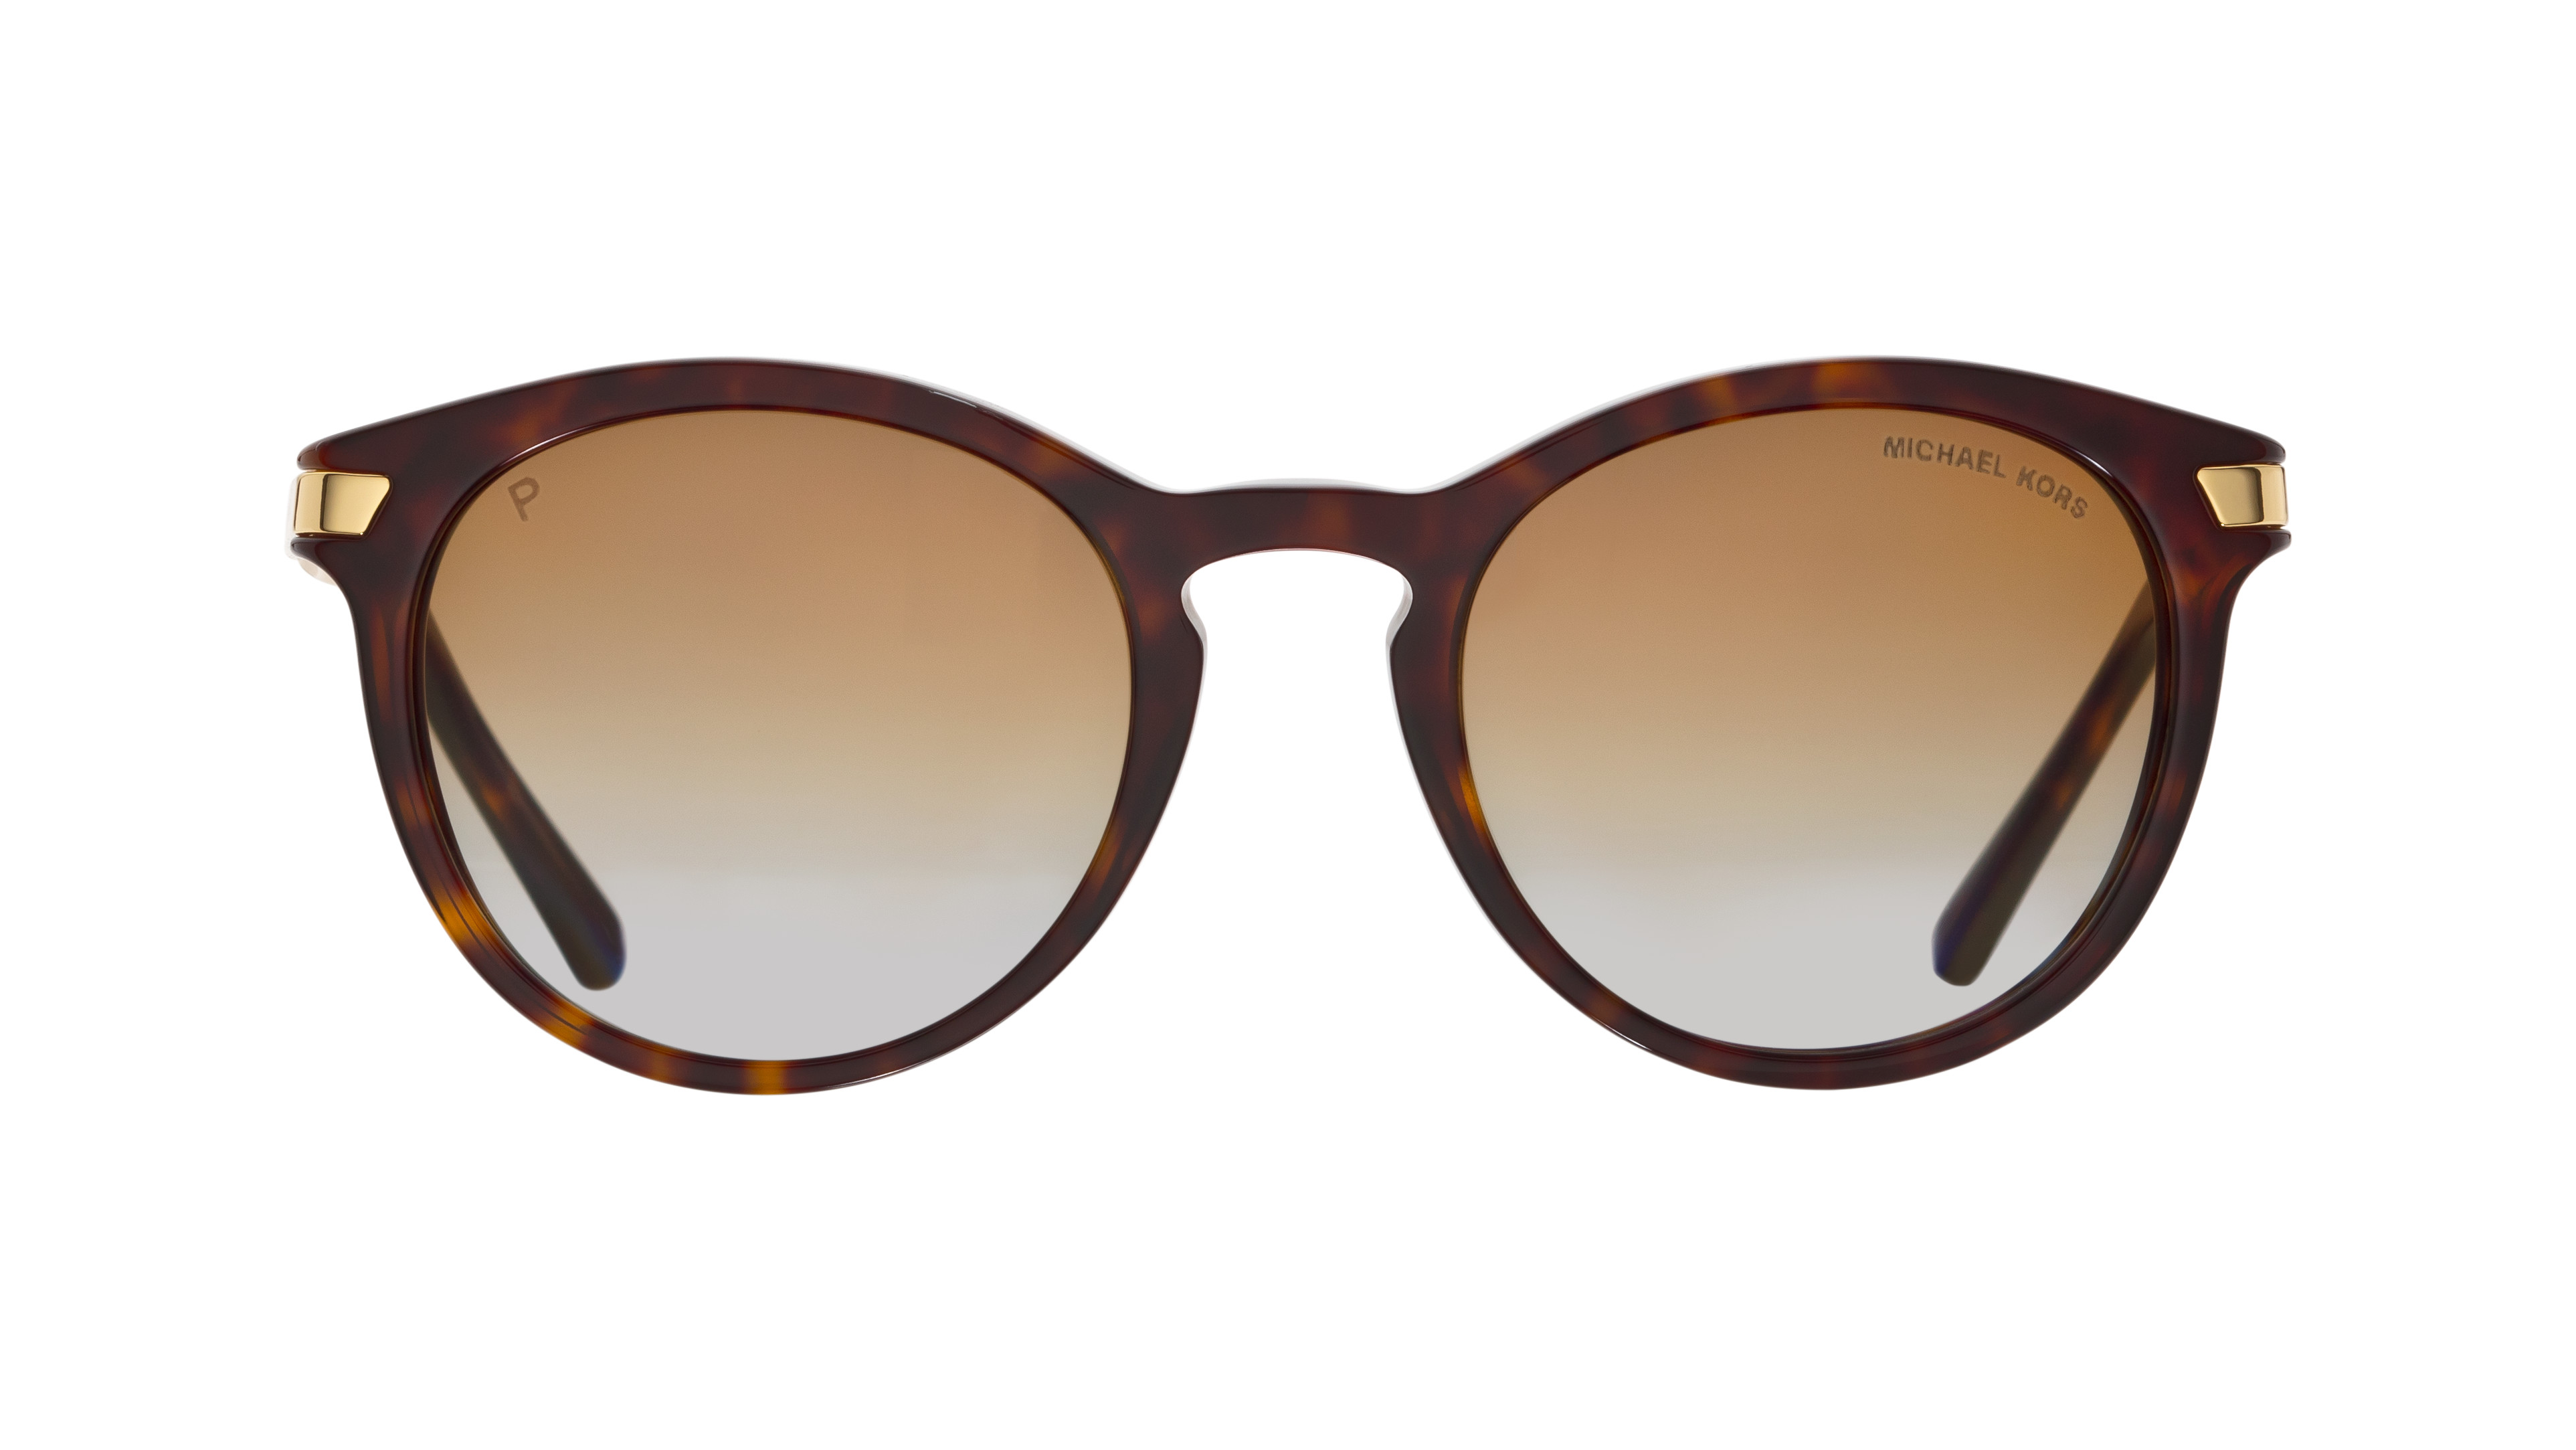 [products.image.front] Michael Kors ADRIANNA III 0MK2023 3106T5 Sonnenbrille